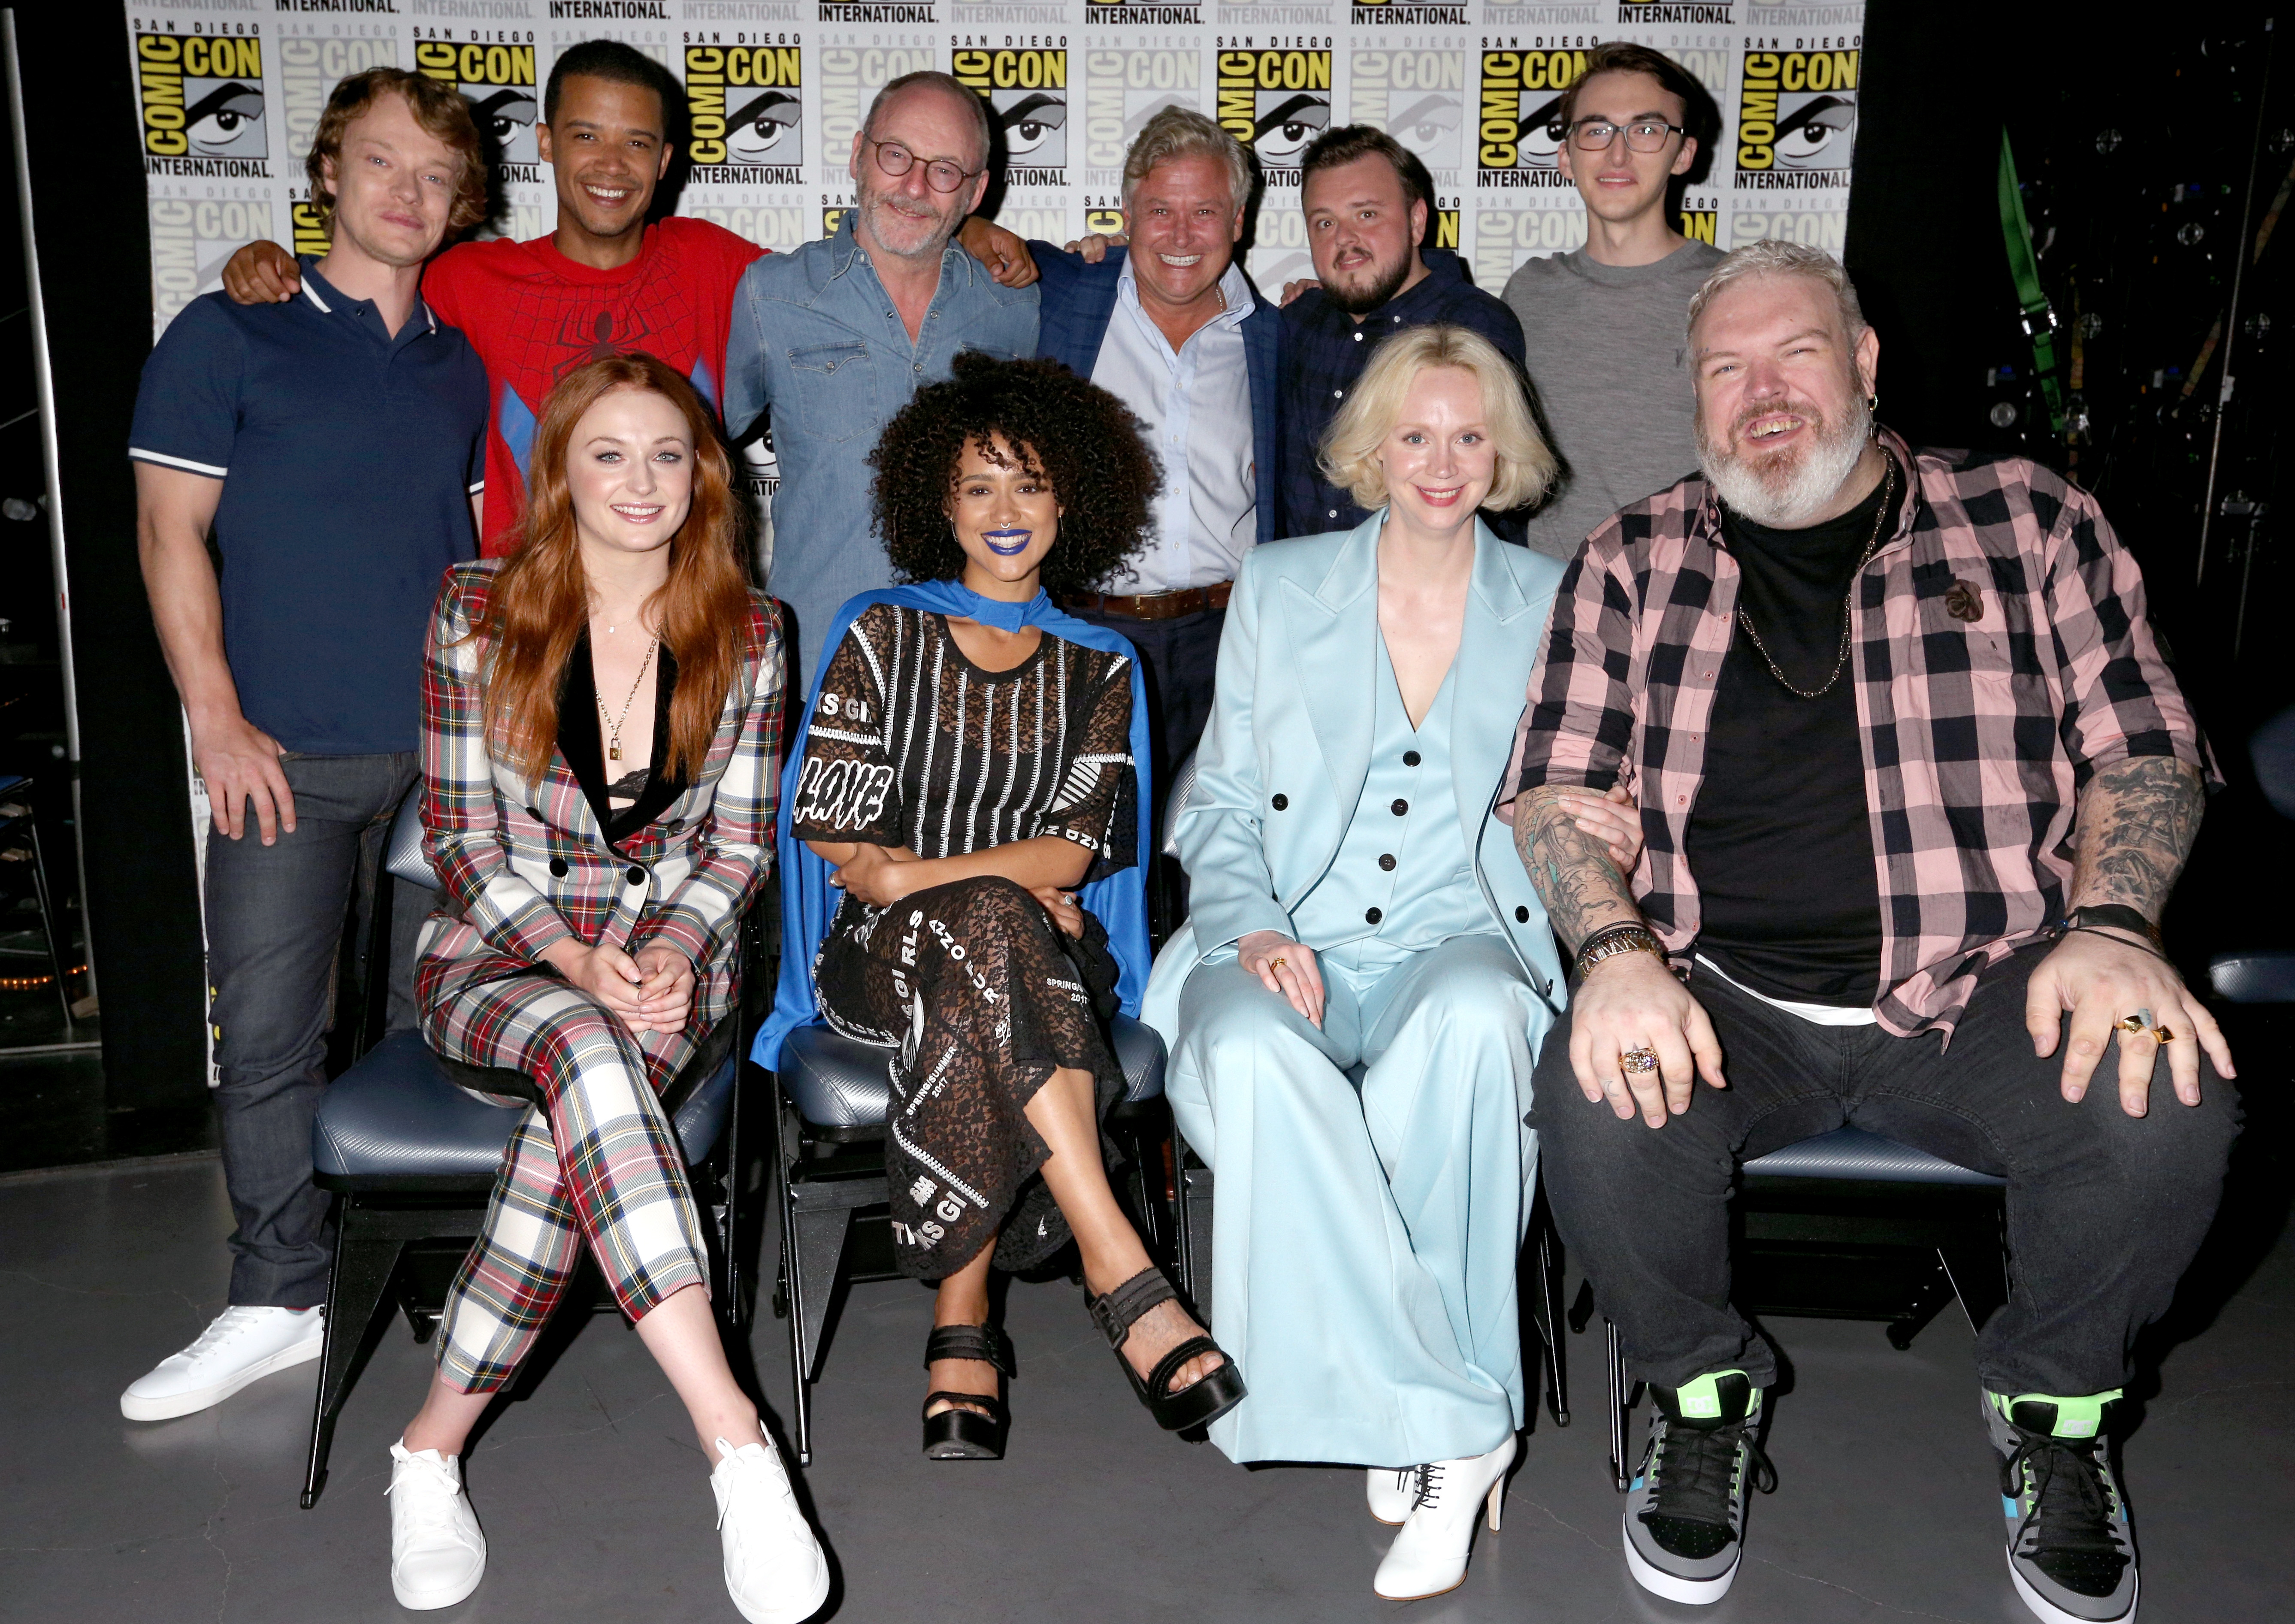 The cast of Game of Thrones appeared at Comic Con